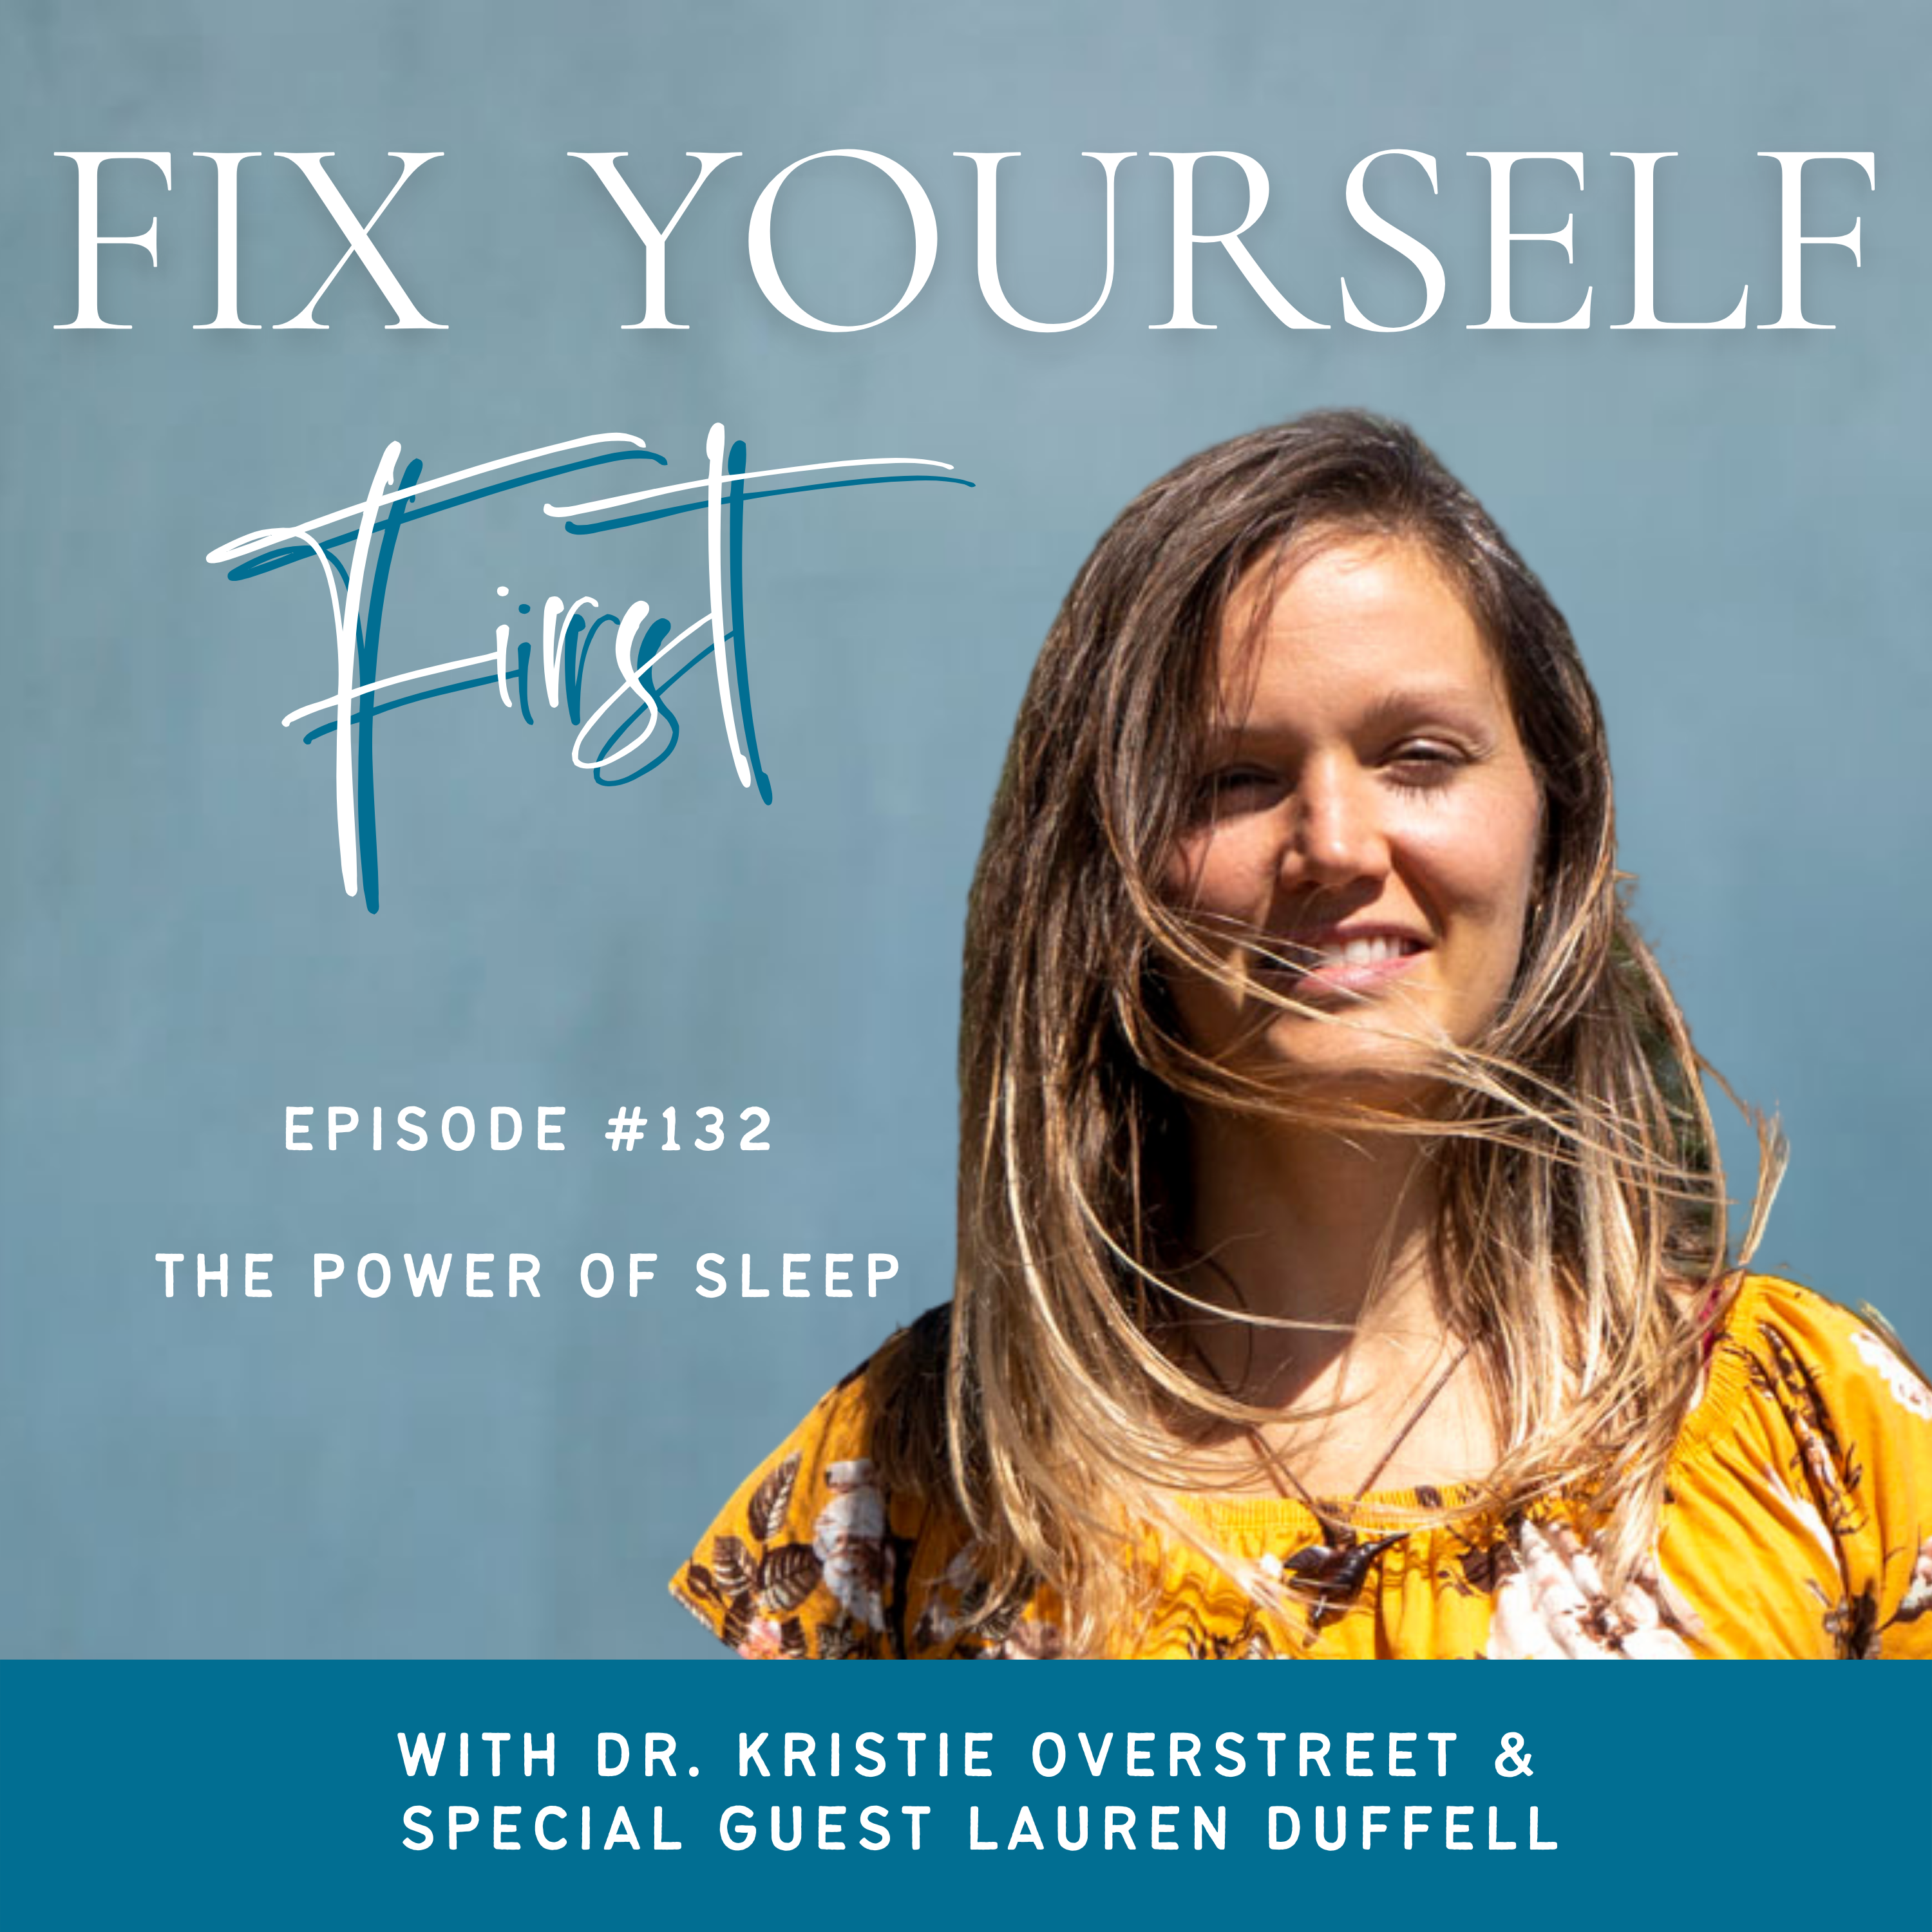 Fix Yourself First Episode 132 The Power of Sleep with Lauren Duffell